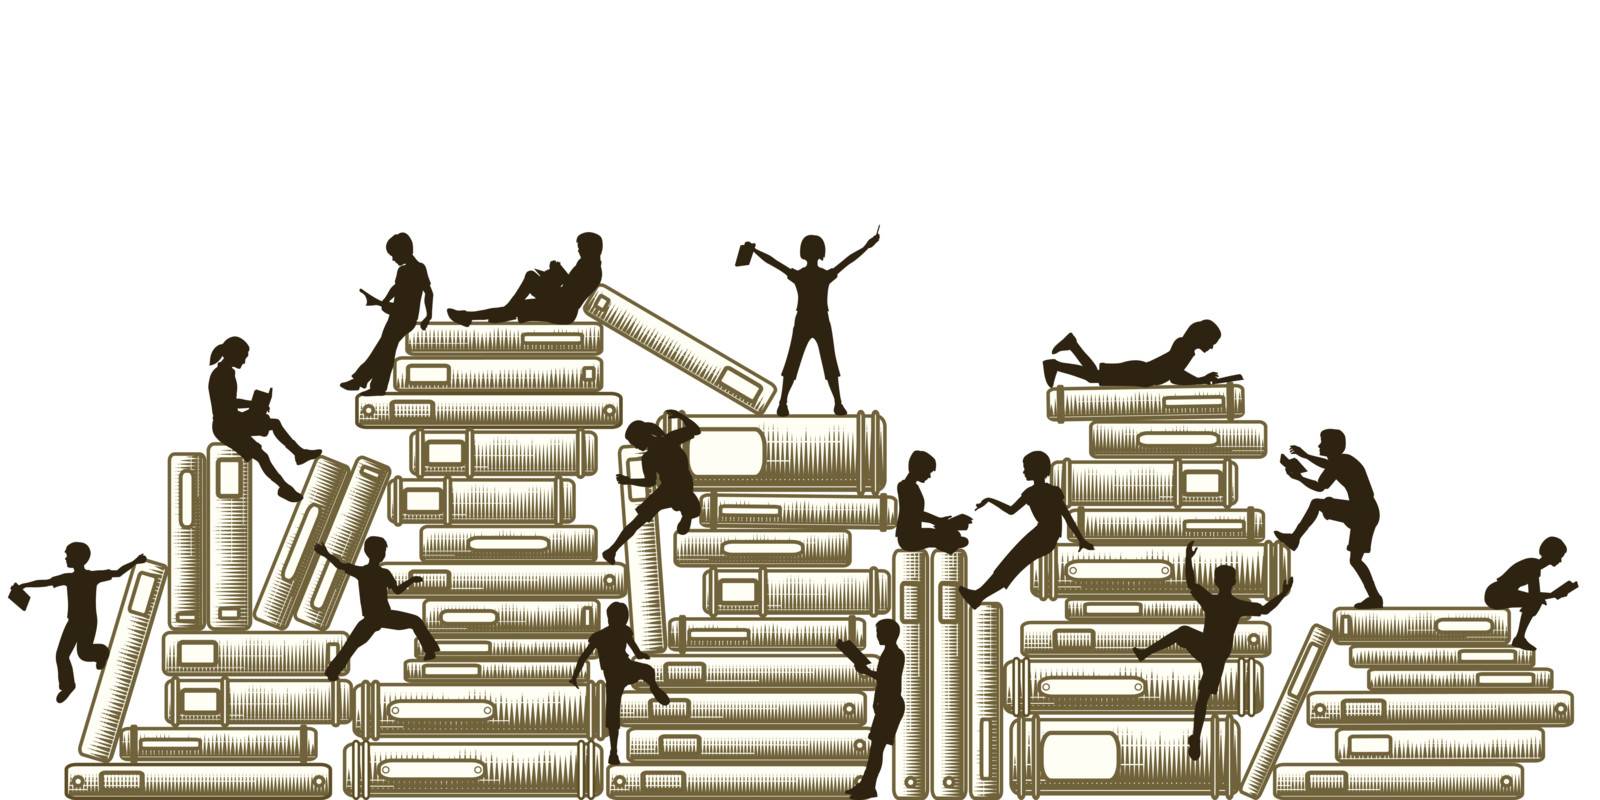 Editable vector illustration of children reading and clambering over piles of books